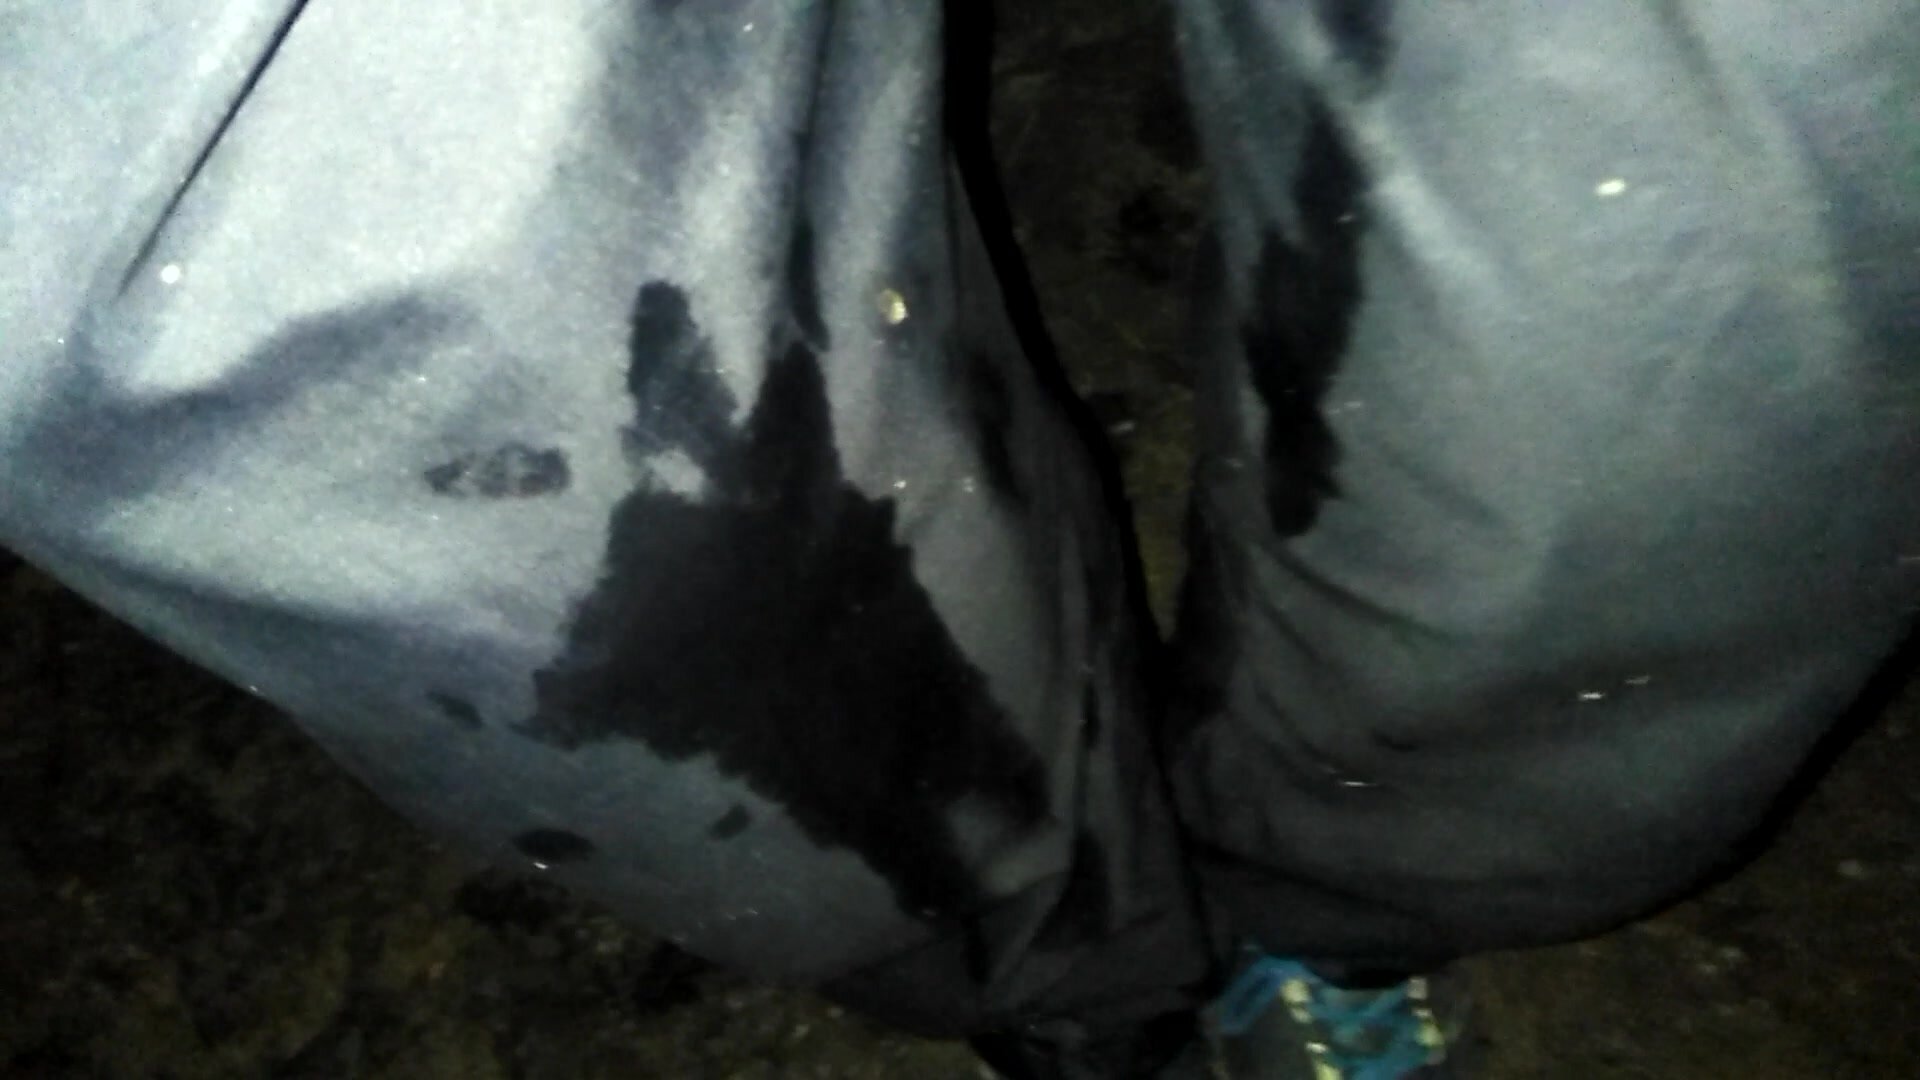 Wetting sweatpants in forest at night 2016